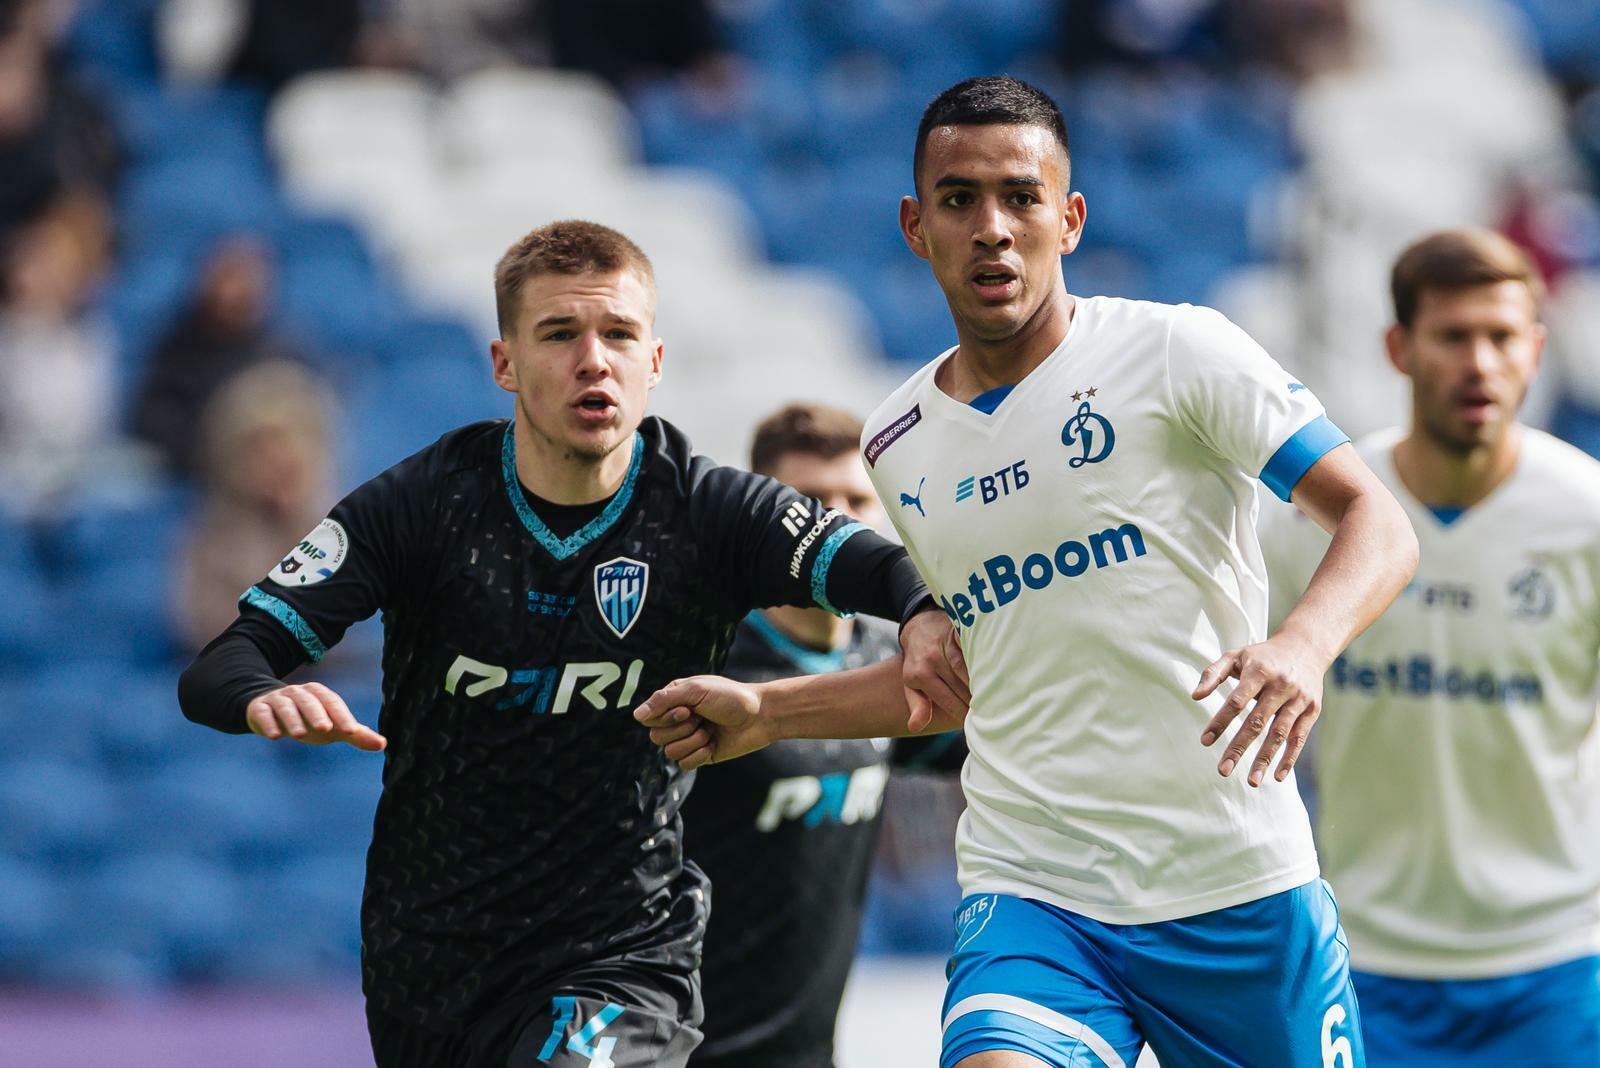 FC Dynamo Moscow News | Preview of the "Pari NN" vs. "Dynamo" match: where to watch, our news, and everything about the opponent. The official website of Dynamo club.